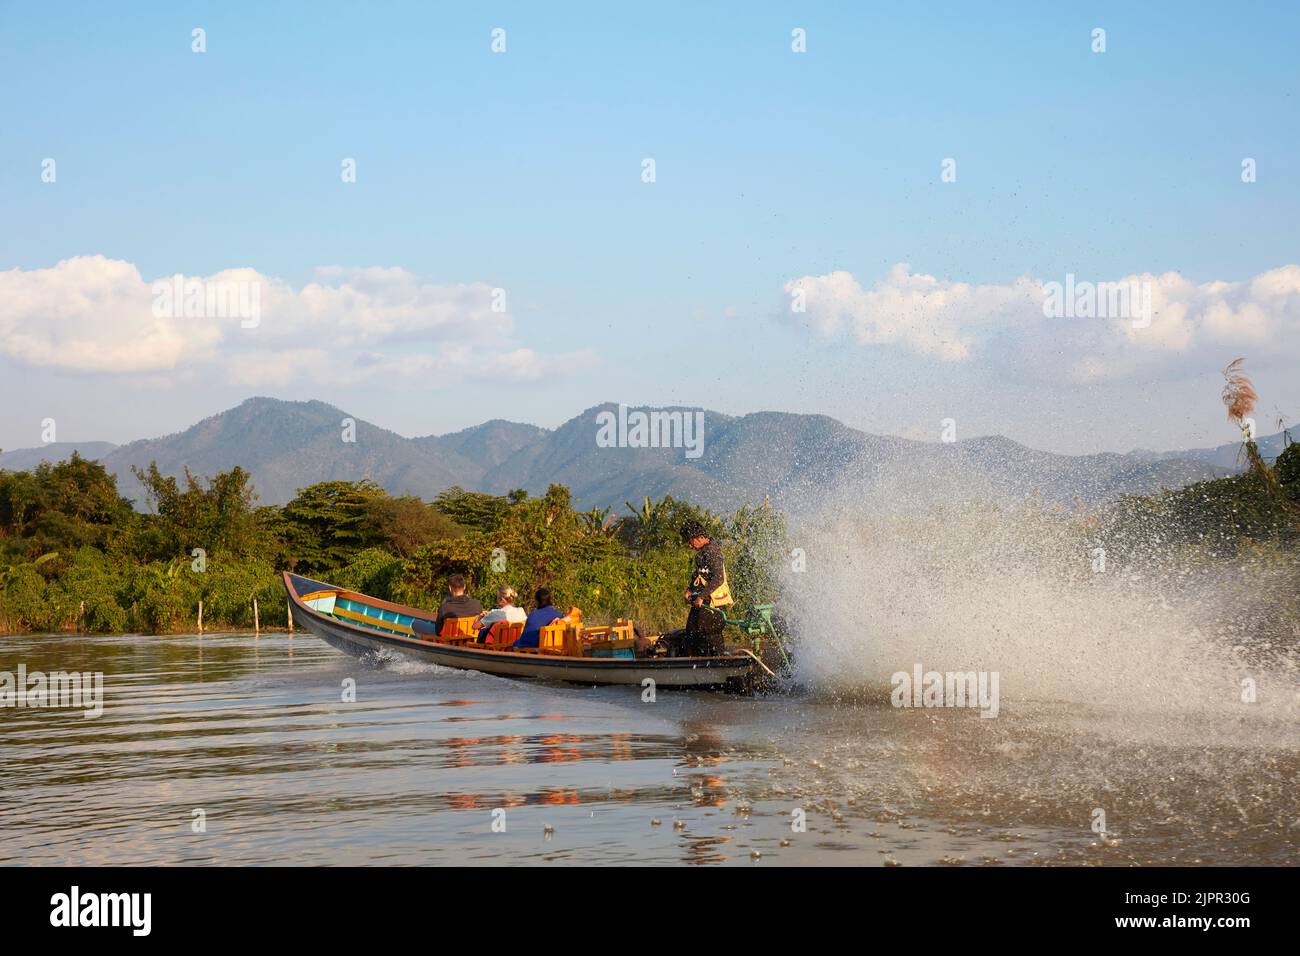 A traditional wooden boat with tourists, Inle Lake, Myanmar. Stock Photo